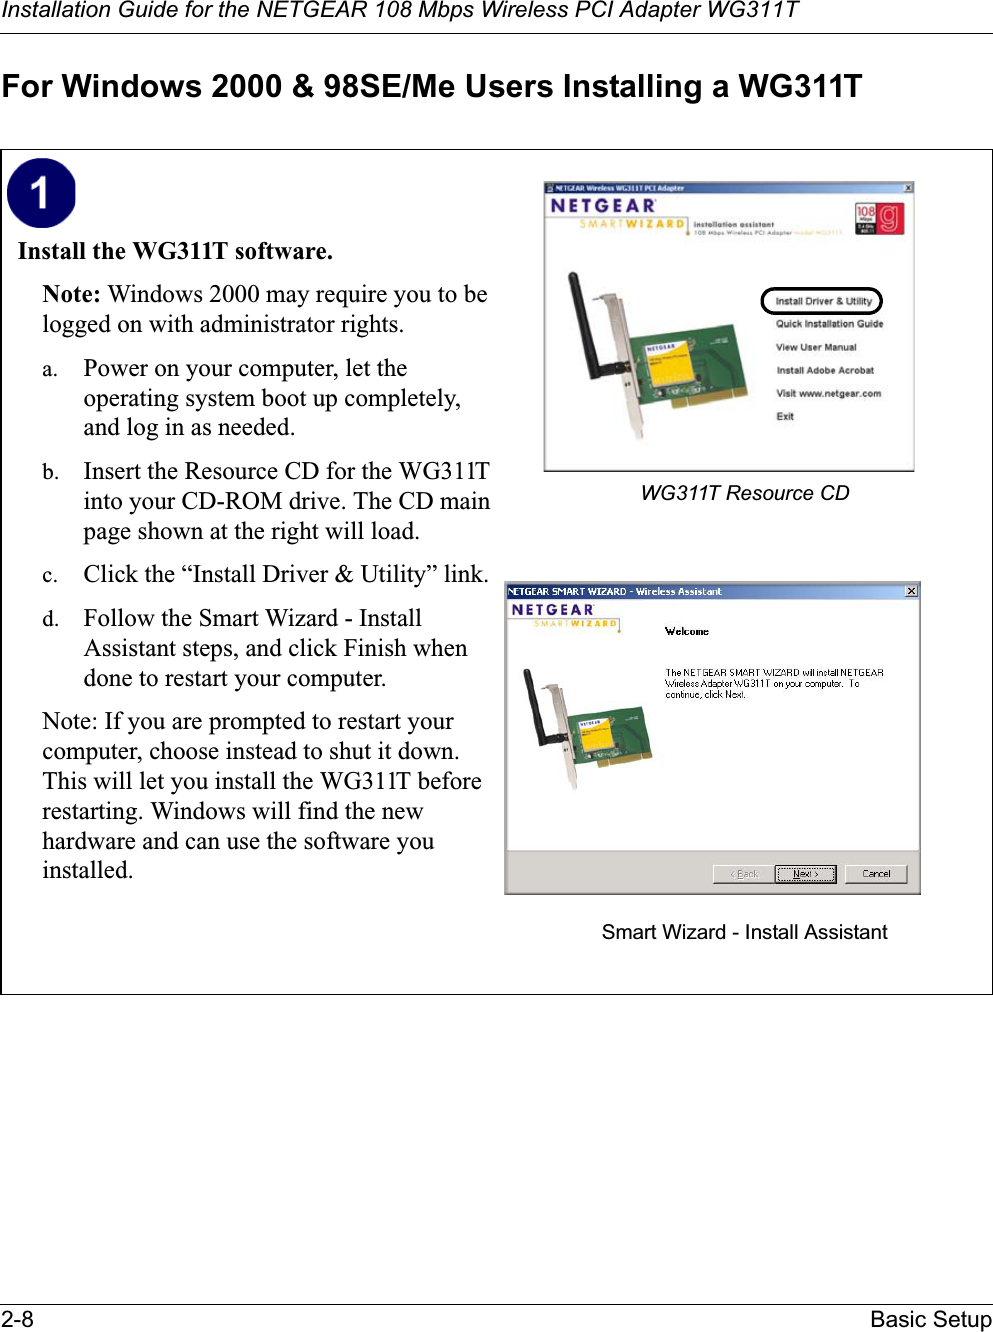 Installation Guide for the NETGEAR 108 Mbps Wireless PCI Adapter WG311T2-8 Basic SetupFor Windows 2000 &amp; 98SE/Me Users Installing a WG311TInstall the WG311T software. Note: Windows 2000 may require you to be logged on with administrator rights.a. Power on your computer, let the operating system boot up completely, and log in as needed.b. Insert the Resource CD for the WG311T into your CD-ROM drive. The CD main page shown at the right will load.c. Click the “Install Driver &amp; Utility” link.d. Follow the Smart Wizard - Install Assistant steps, and click Finish when done to restart your computer.Note: If you are prompted to restart your computer, choose instead to shut it down. This will let you install the WG311T before restarting. Windows will find the new hardware and can use the software you installed.WG311T Resource CDSmart Wizard - Install Assistant